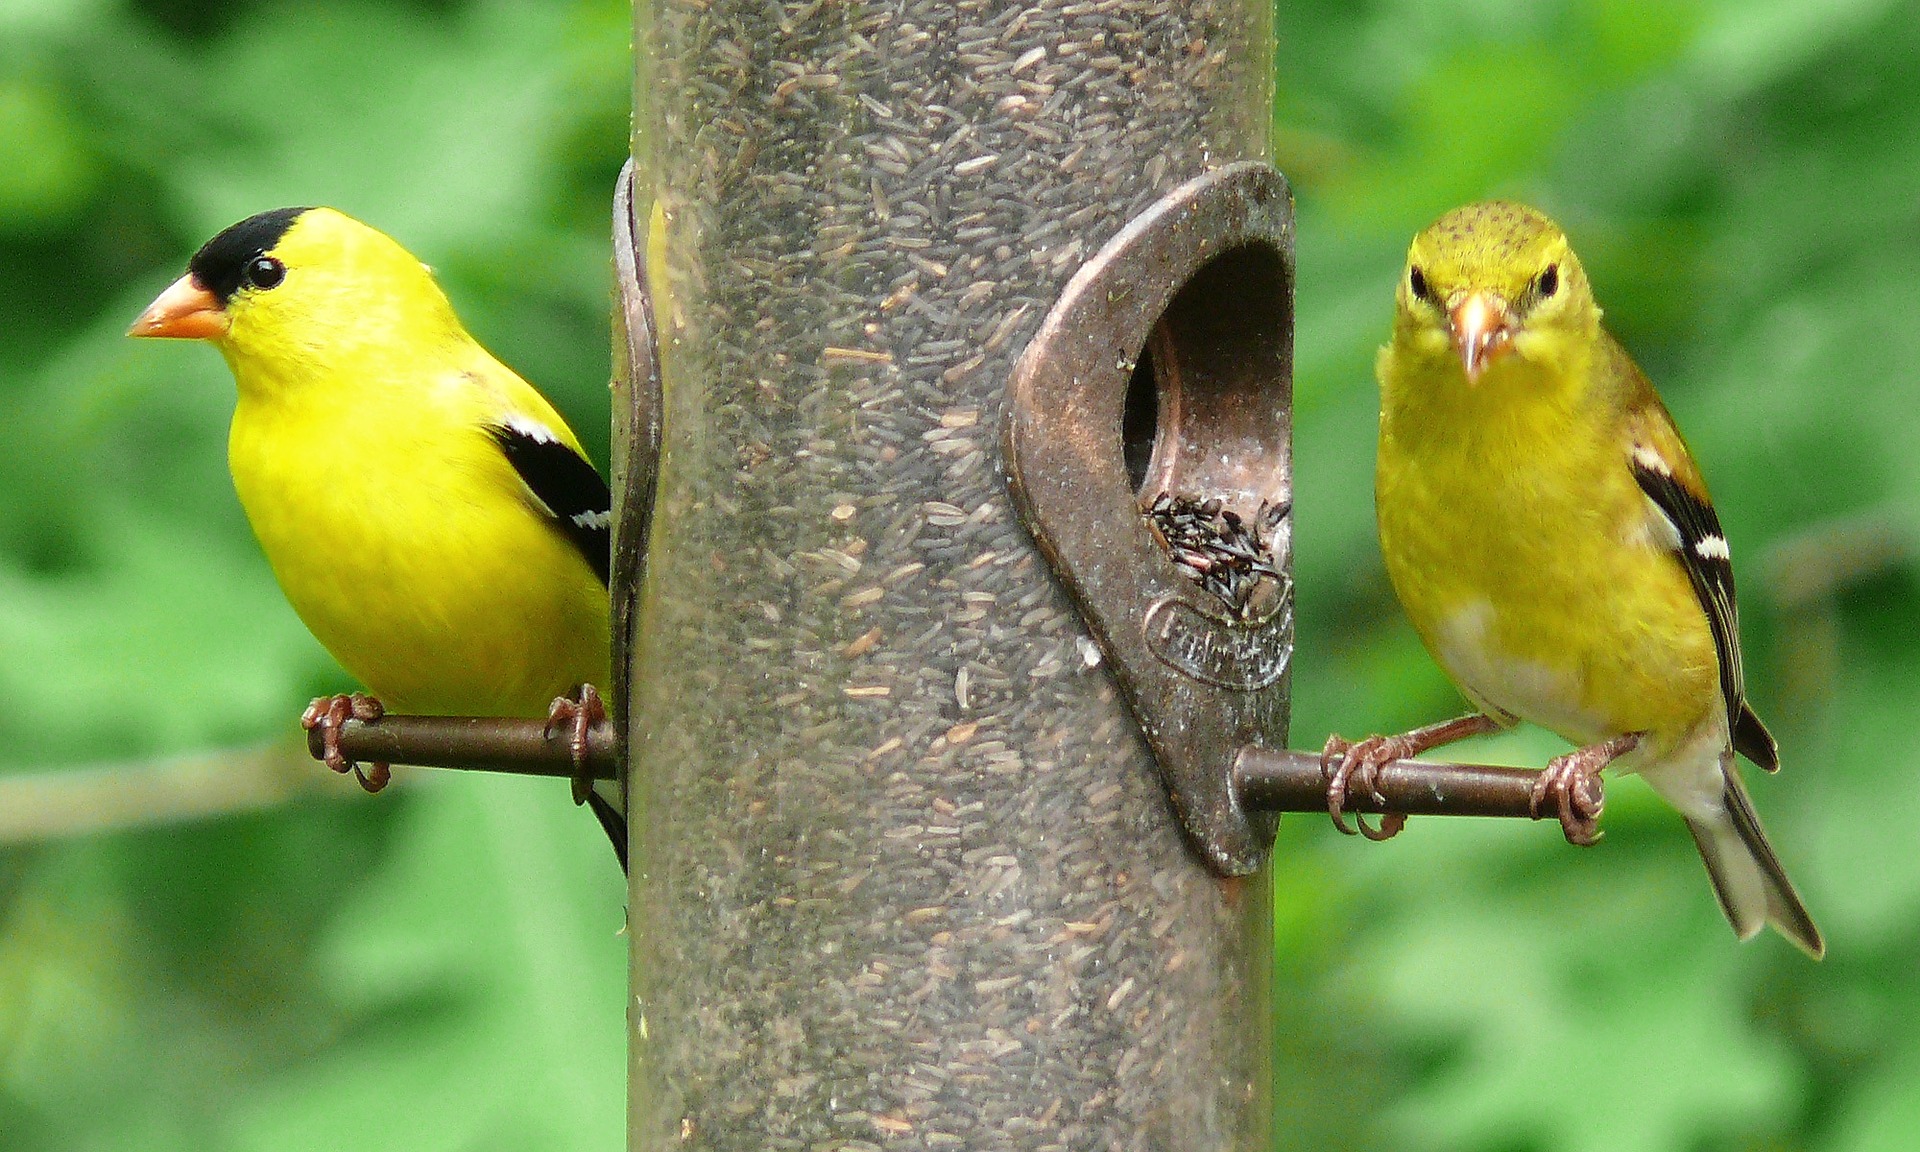 male and female goldfinch on feeder - what do goldfinches eat